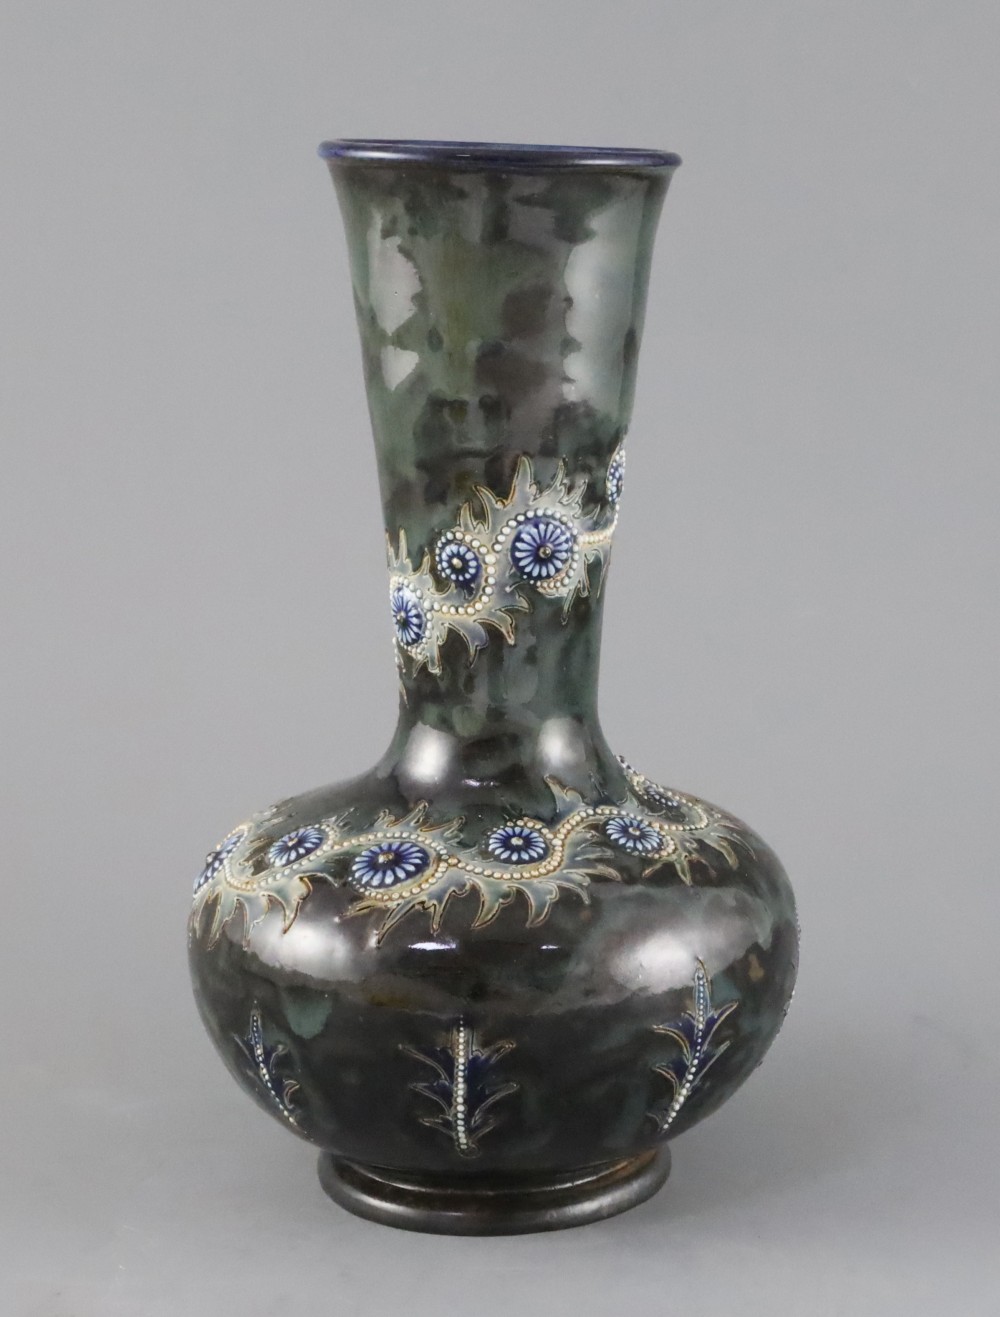 George Tinworth for Doulton Lambeth, a Persian shape bottle vase, dated 1880,